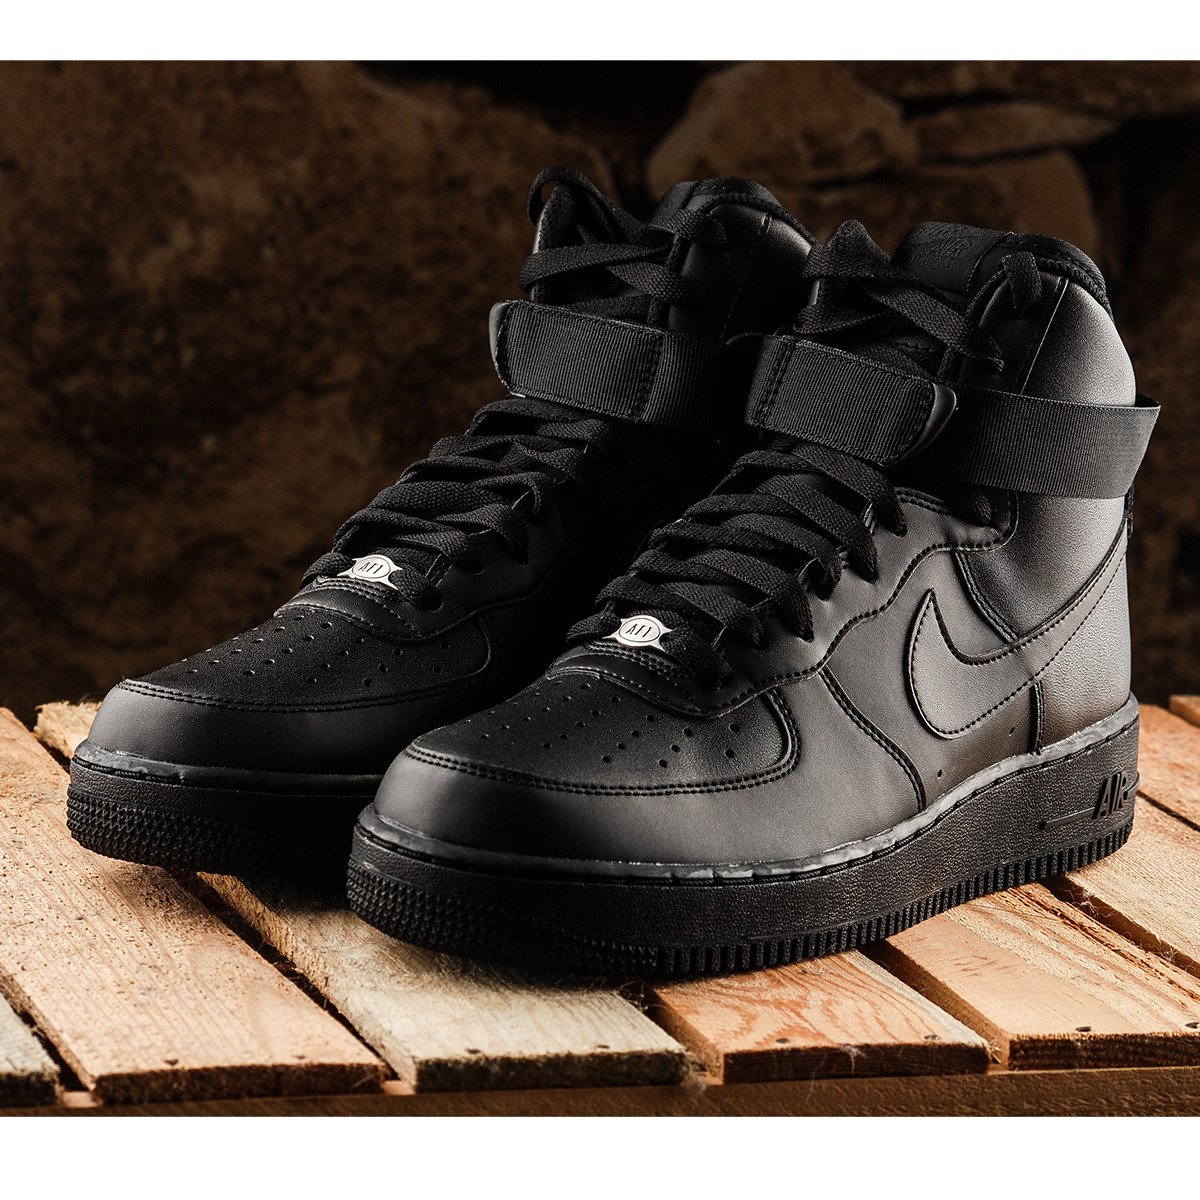 Nike AIR FORCE 1 HIGH '07 Shoes -315121-032 | Basketball Shoes ...